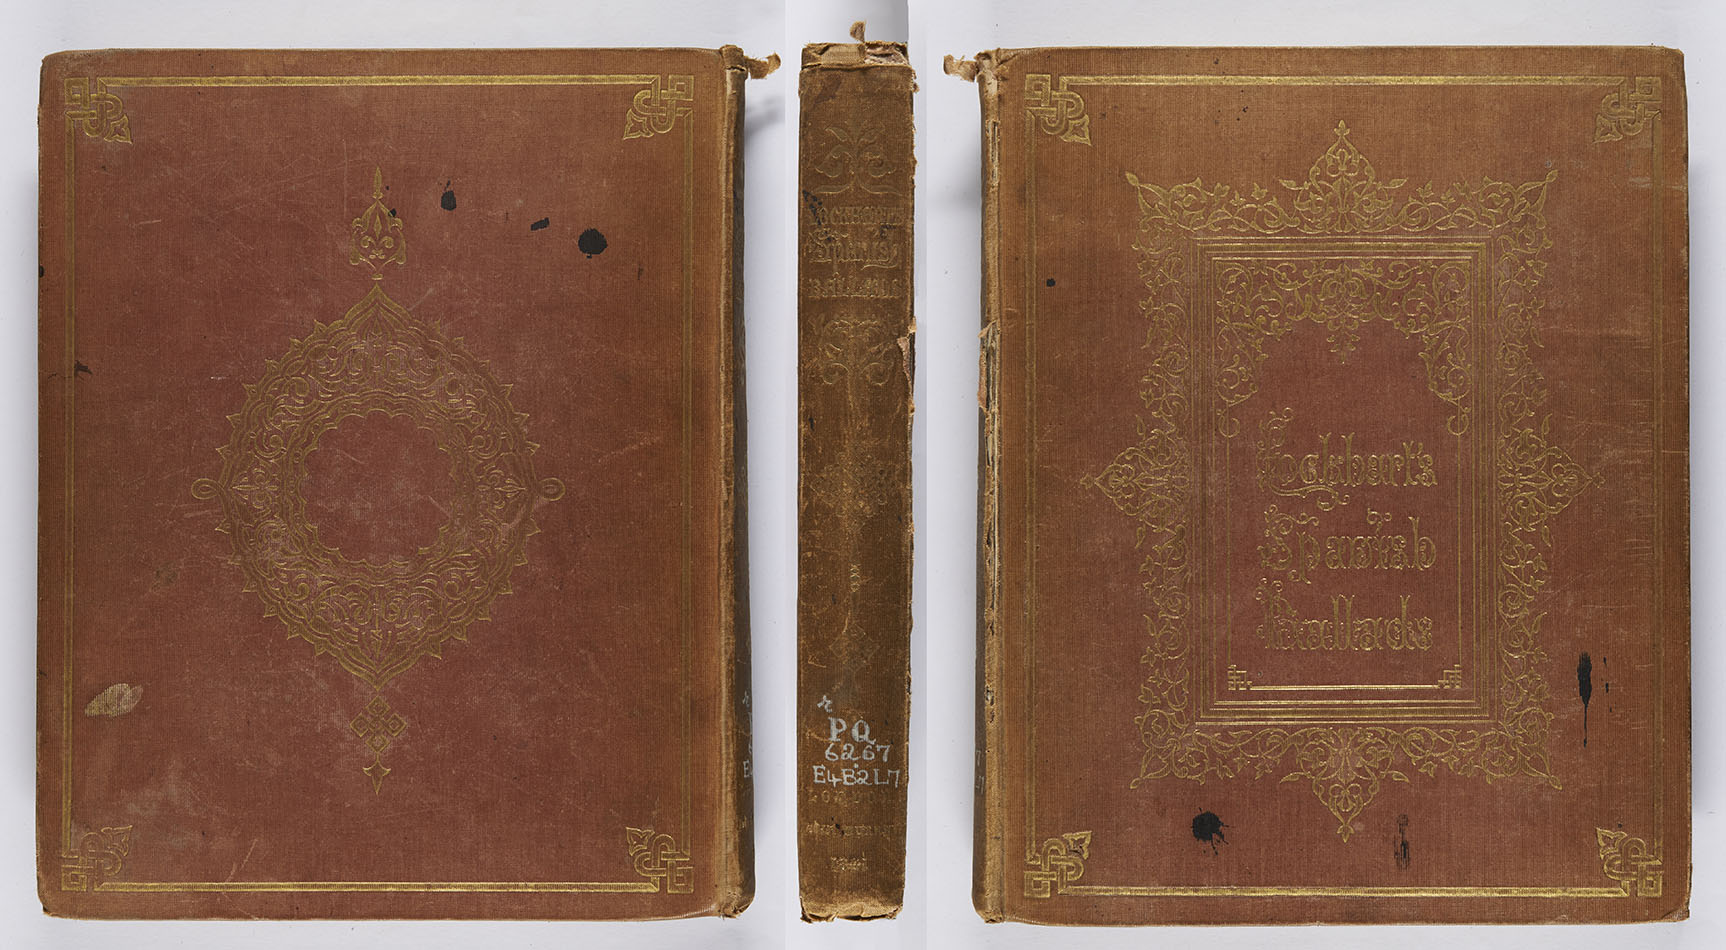 This is an early example of an all-over design blocked in gold, probably designed by Owen Jones. The date 1841 is blocked on the spine, but this practice was soon discontinued. Ancient Spanish ballads; historical and romantic, translated by J. G. Lockhart (London: John Murray, 1841), r PQ6267.E4B2L7. 